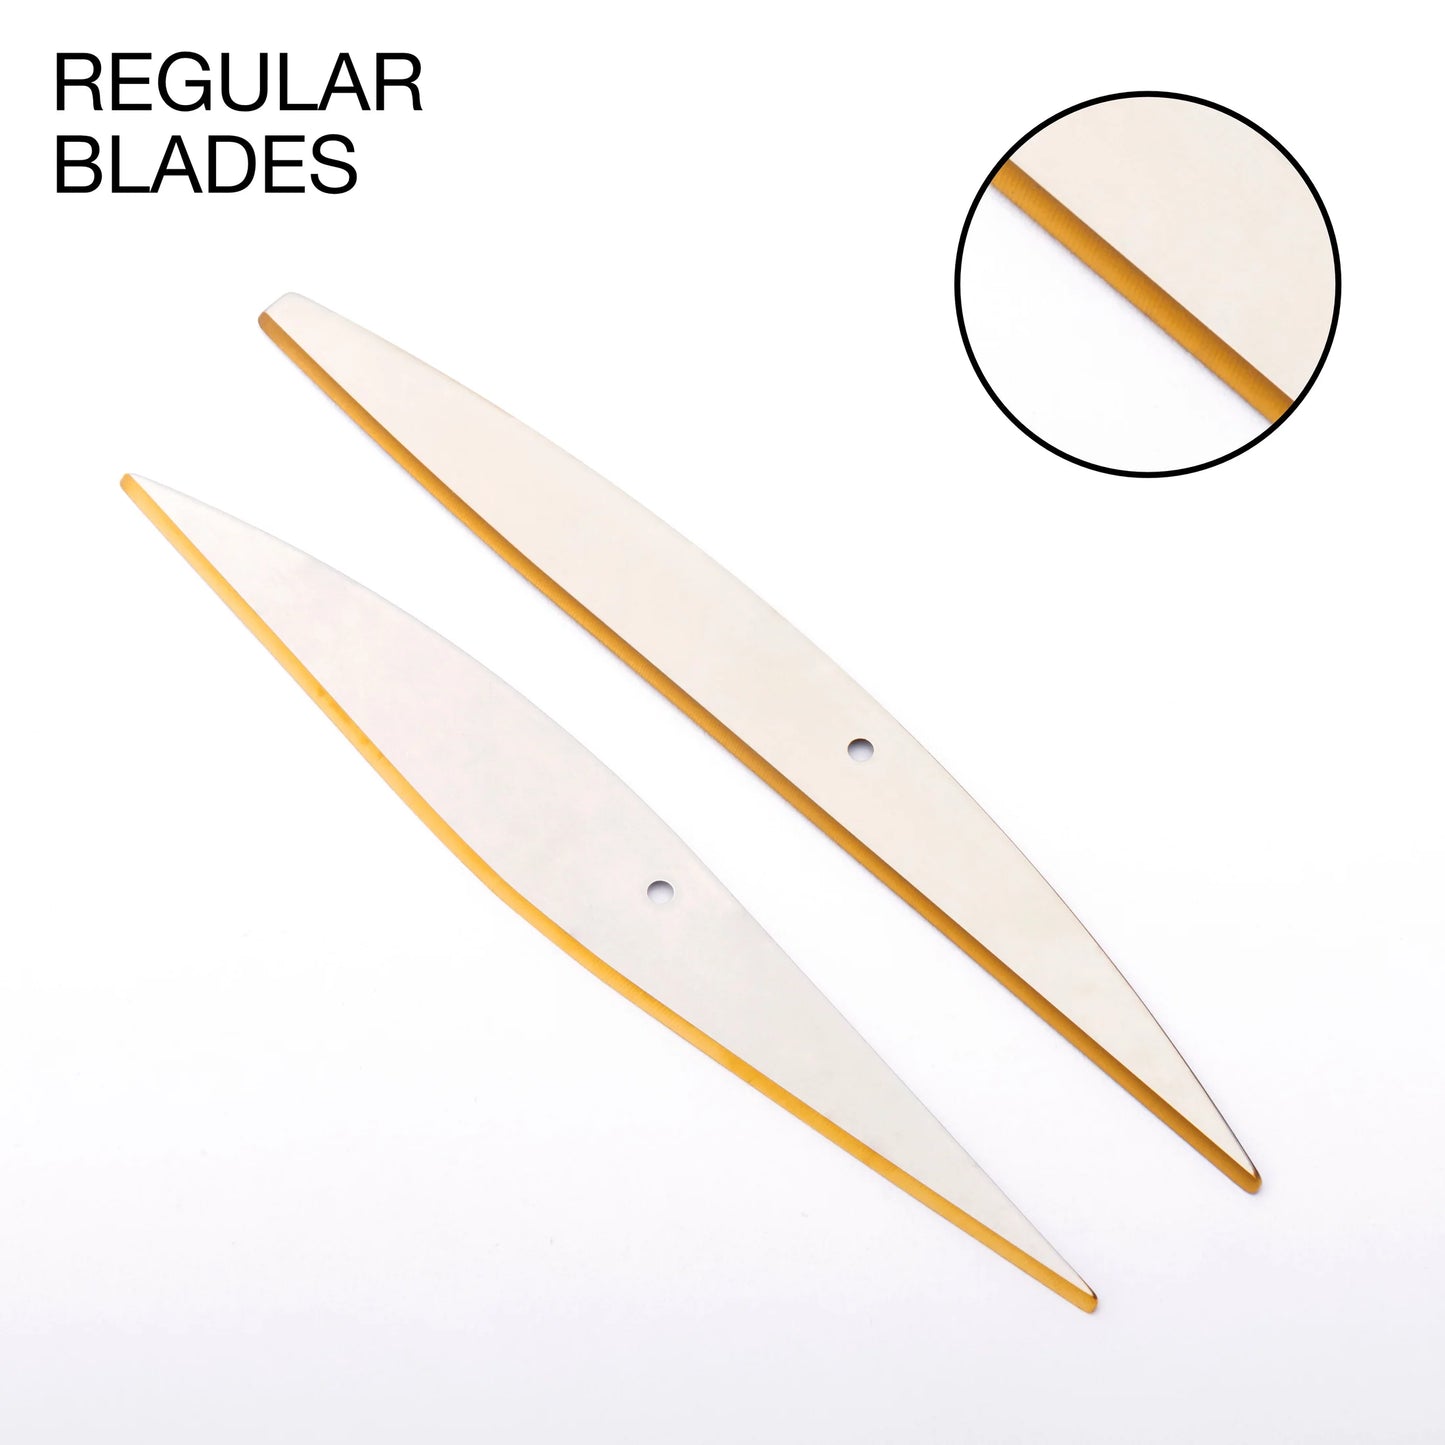 Package Deal: Try both blades!